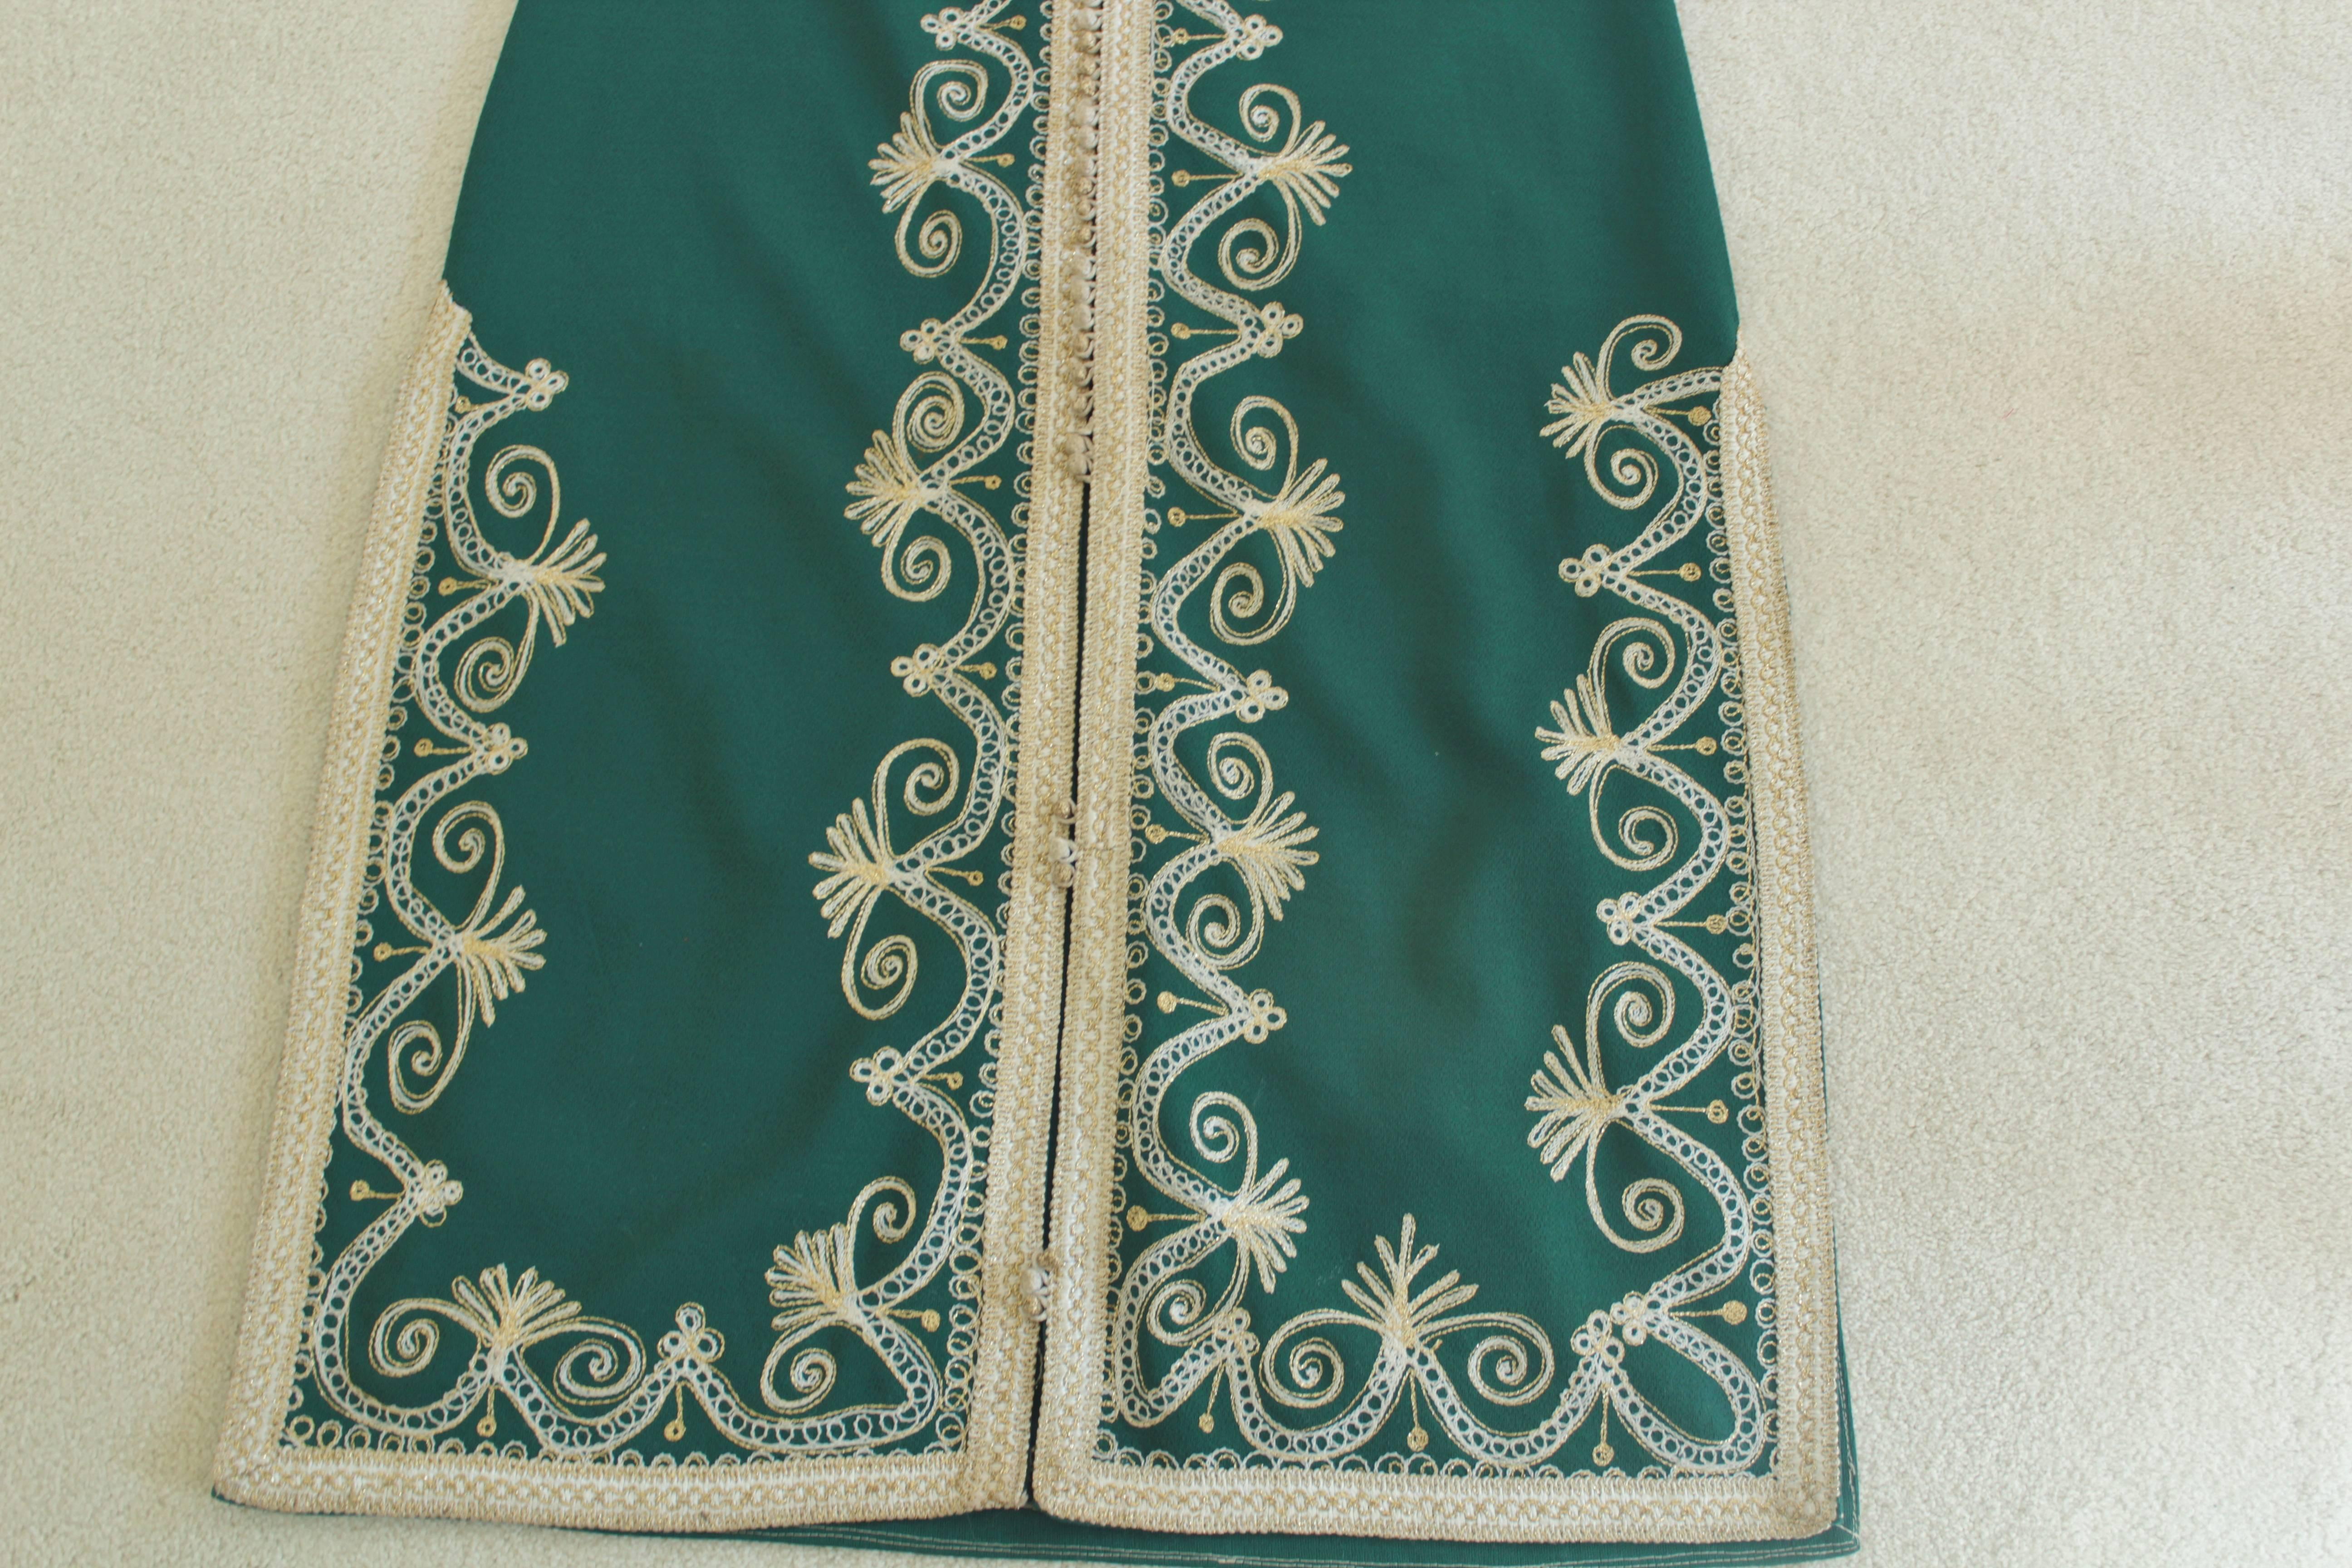 Women's or Men's Moroccan Green Embroidered Caftan Maxi Dress Kaftan Size M For Sale